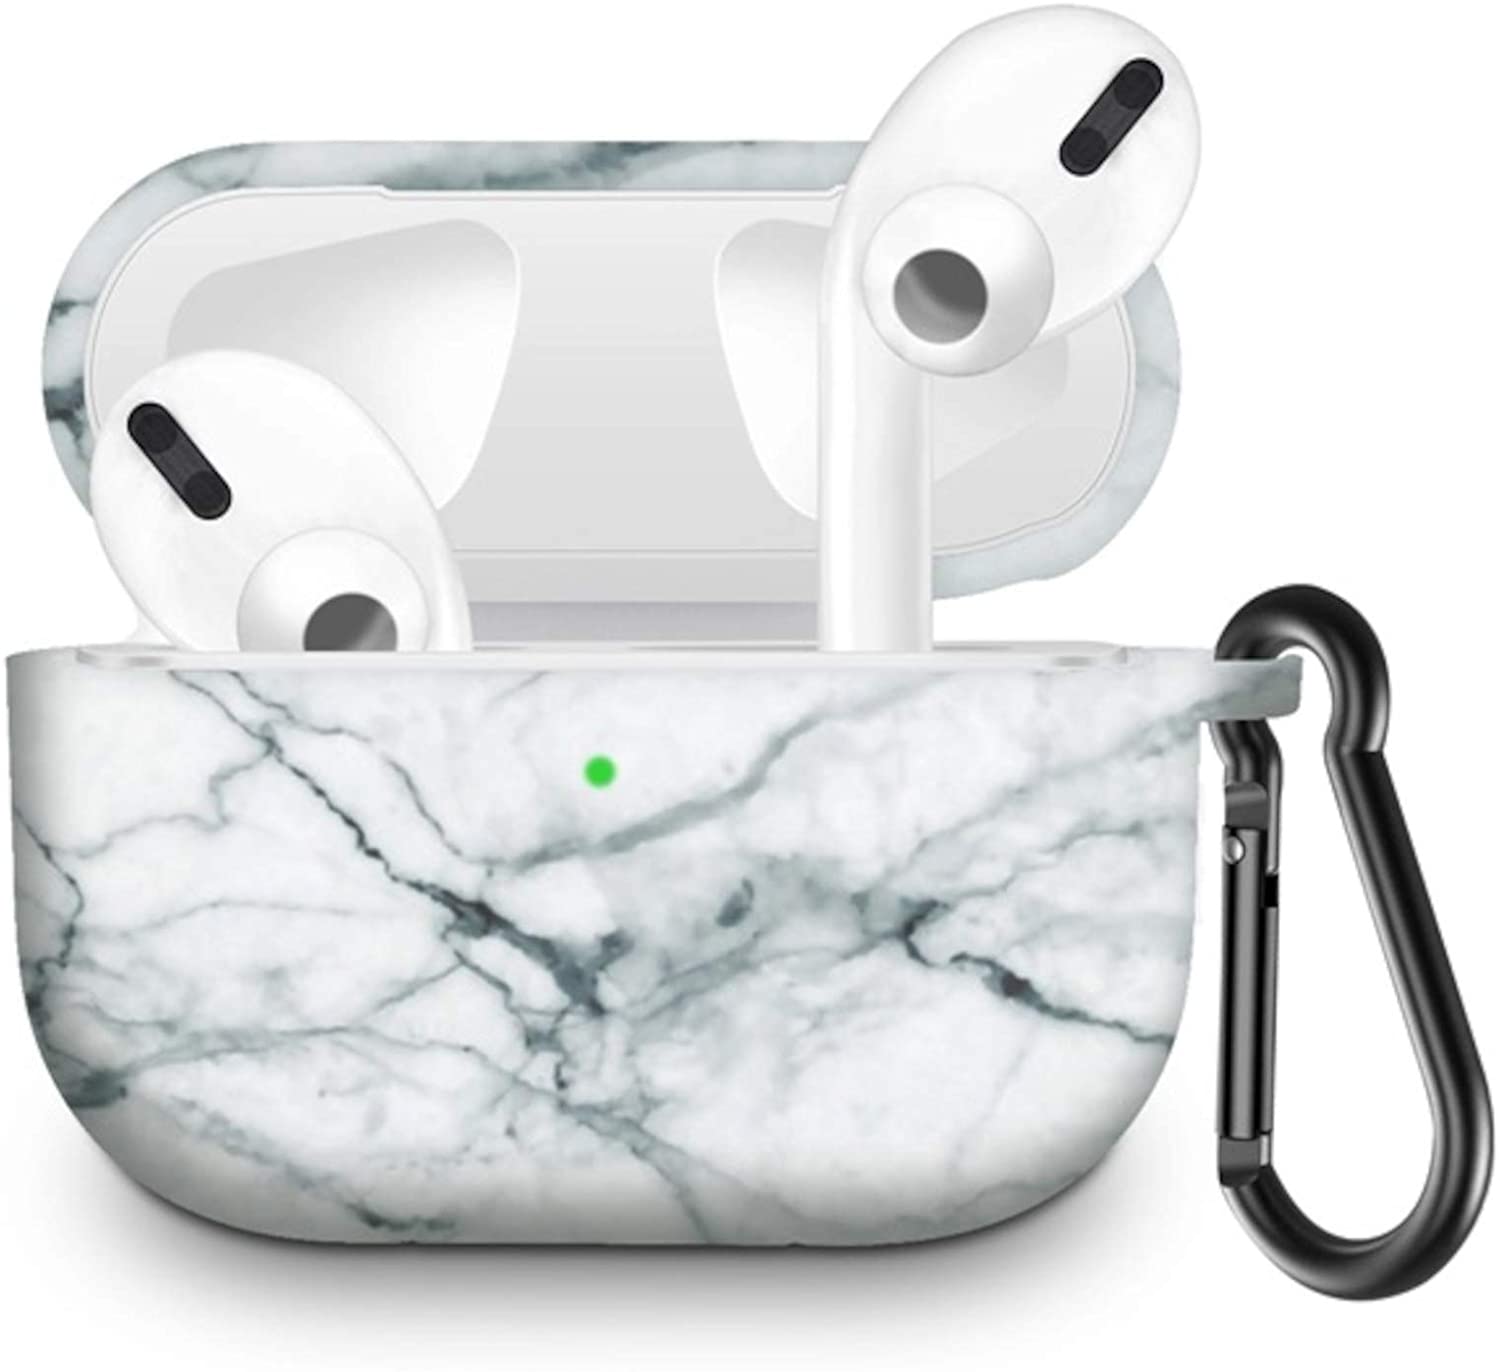 Apple Airpod Pro Case - Cute Marble Stone Design Protective Shockproof Silicone Cover With Clip Keychain Carabiner - Supports Wireless Qi Charging for Airpods Pro Generation 1 -White Marble